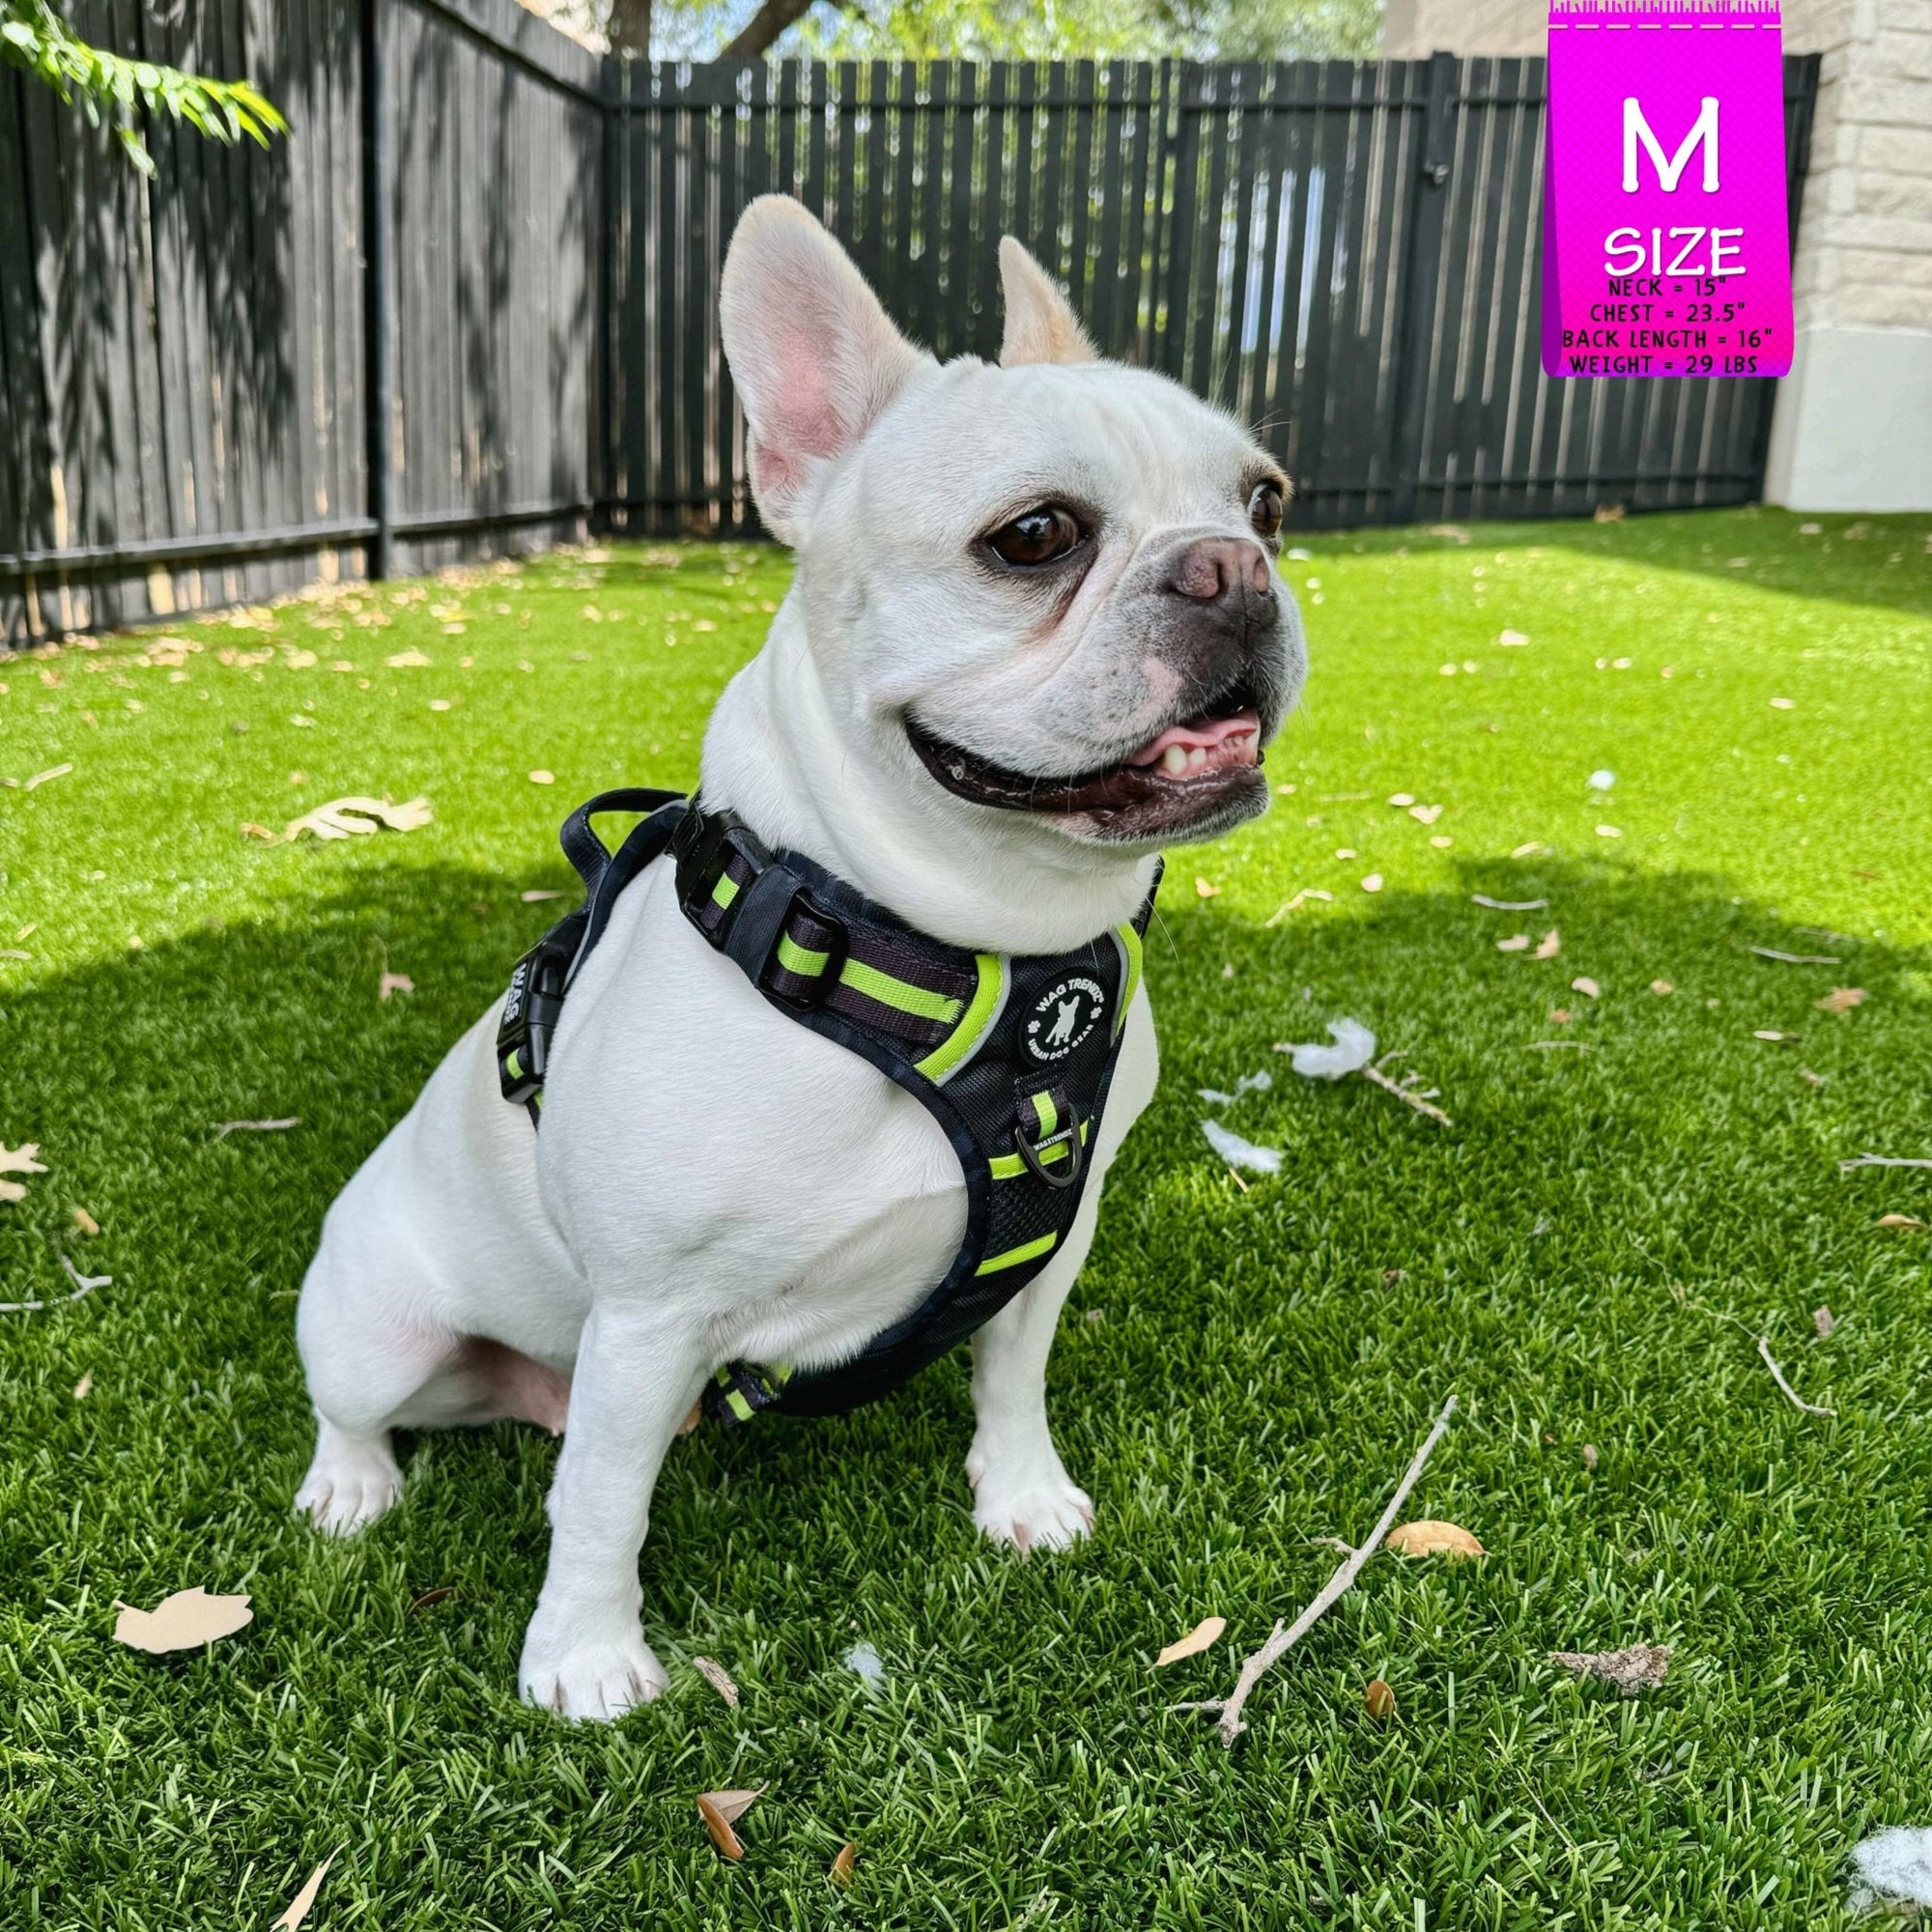 Dog Harness and Leash Set + Poo Bag Holder - French Bulldog wearing Medium no pull harness with handle in black and gray camo with hi vis accents - sitting outdoors in green grass - Wag Trendz